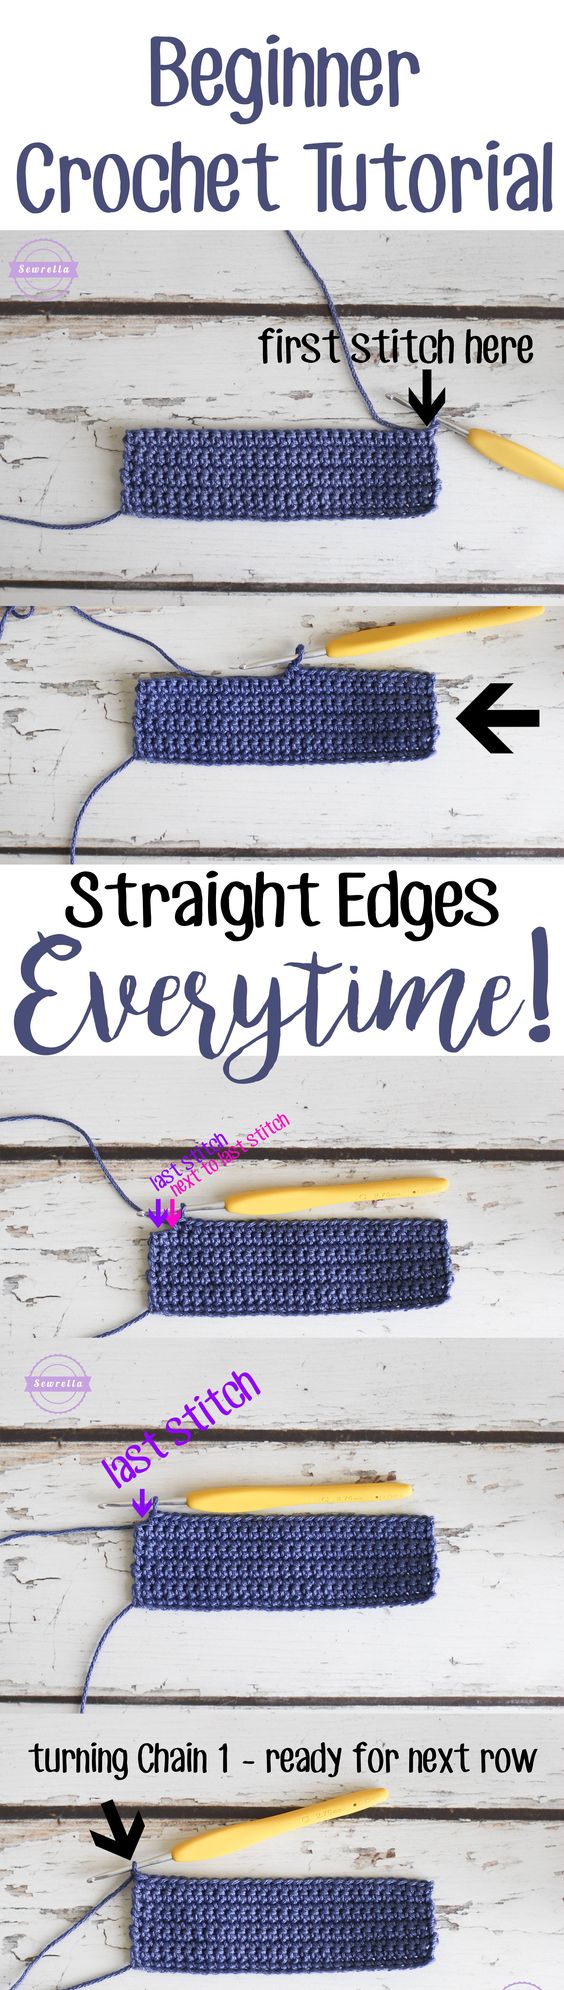 Crochet Tips for Geting Straight Edges Every Time. 